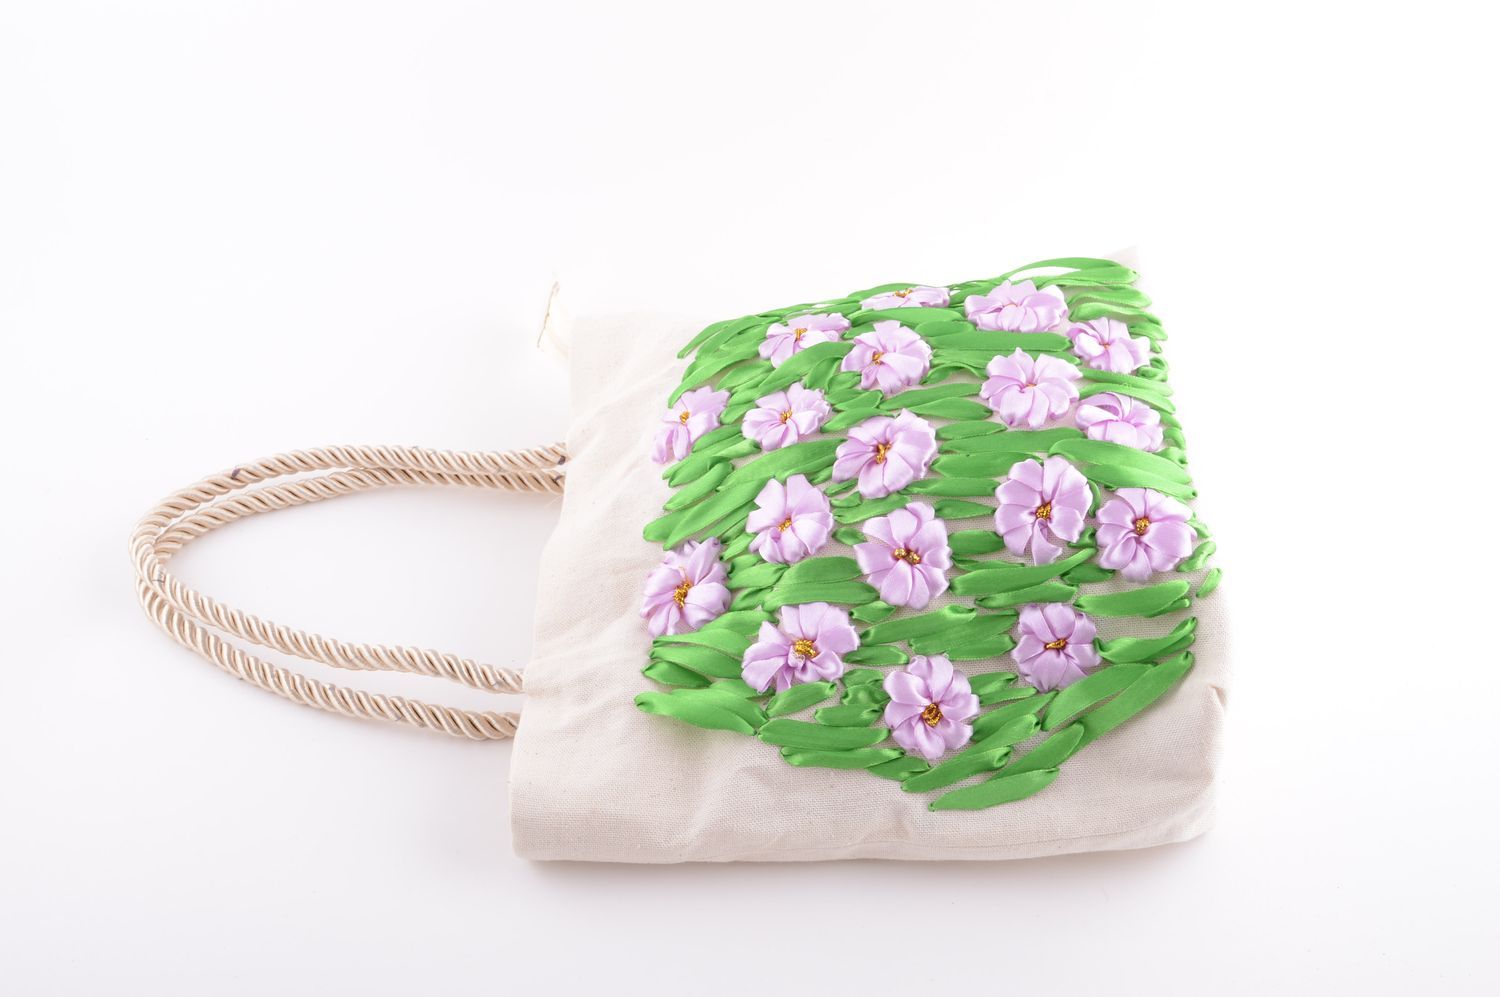 Shoulder bag unusual handmade textile ladys bag with embroidered flowers photo 3